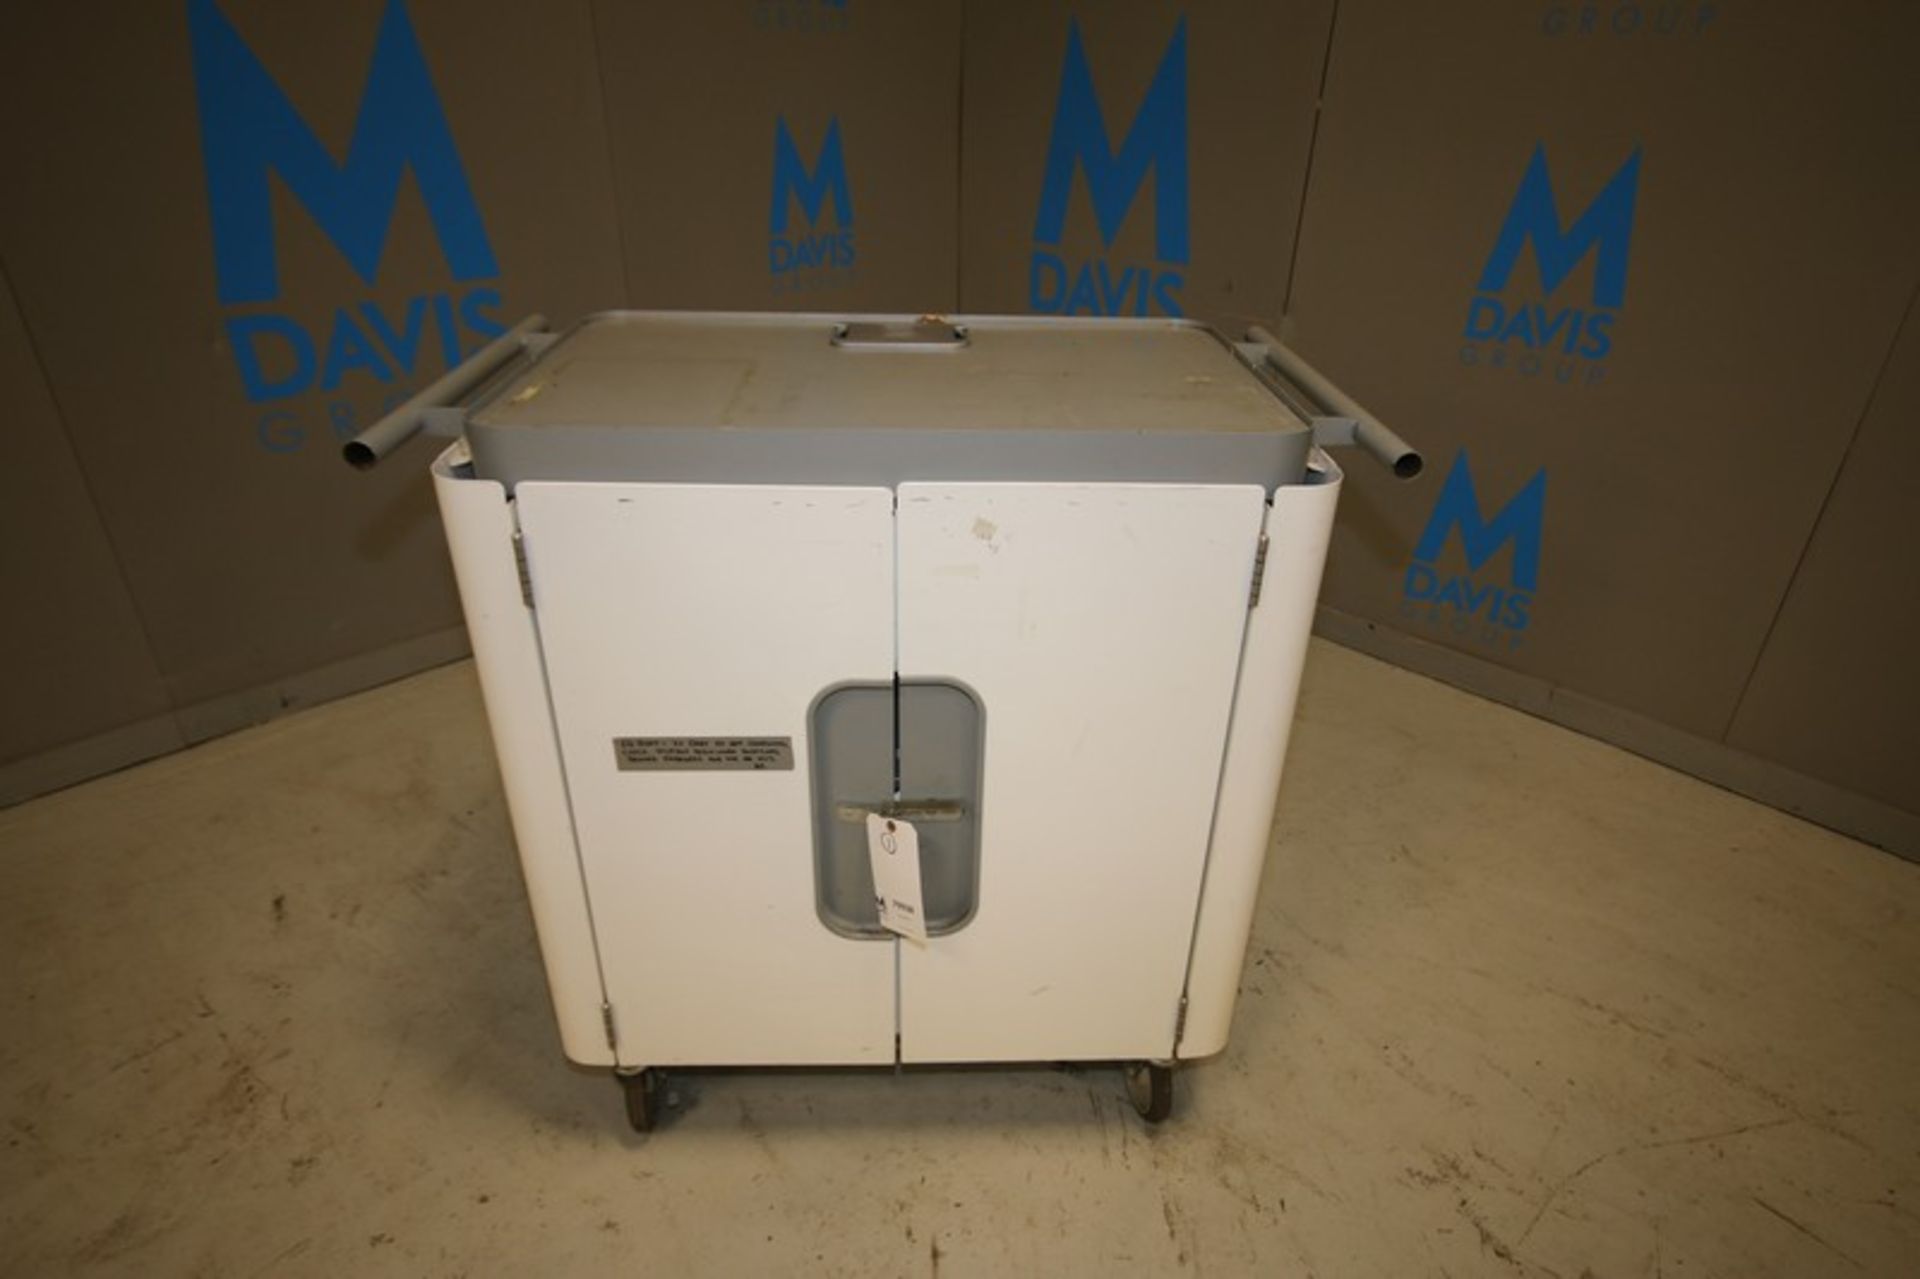 43" L x 24" W x 43" H Portable Electric Supply Cart (INV#79938)(Located @ the MDG Auction Showroom